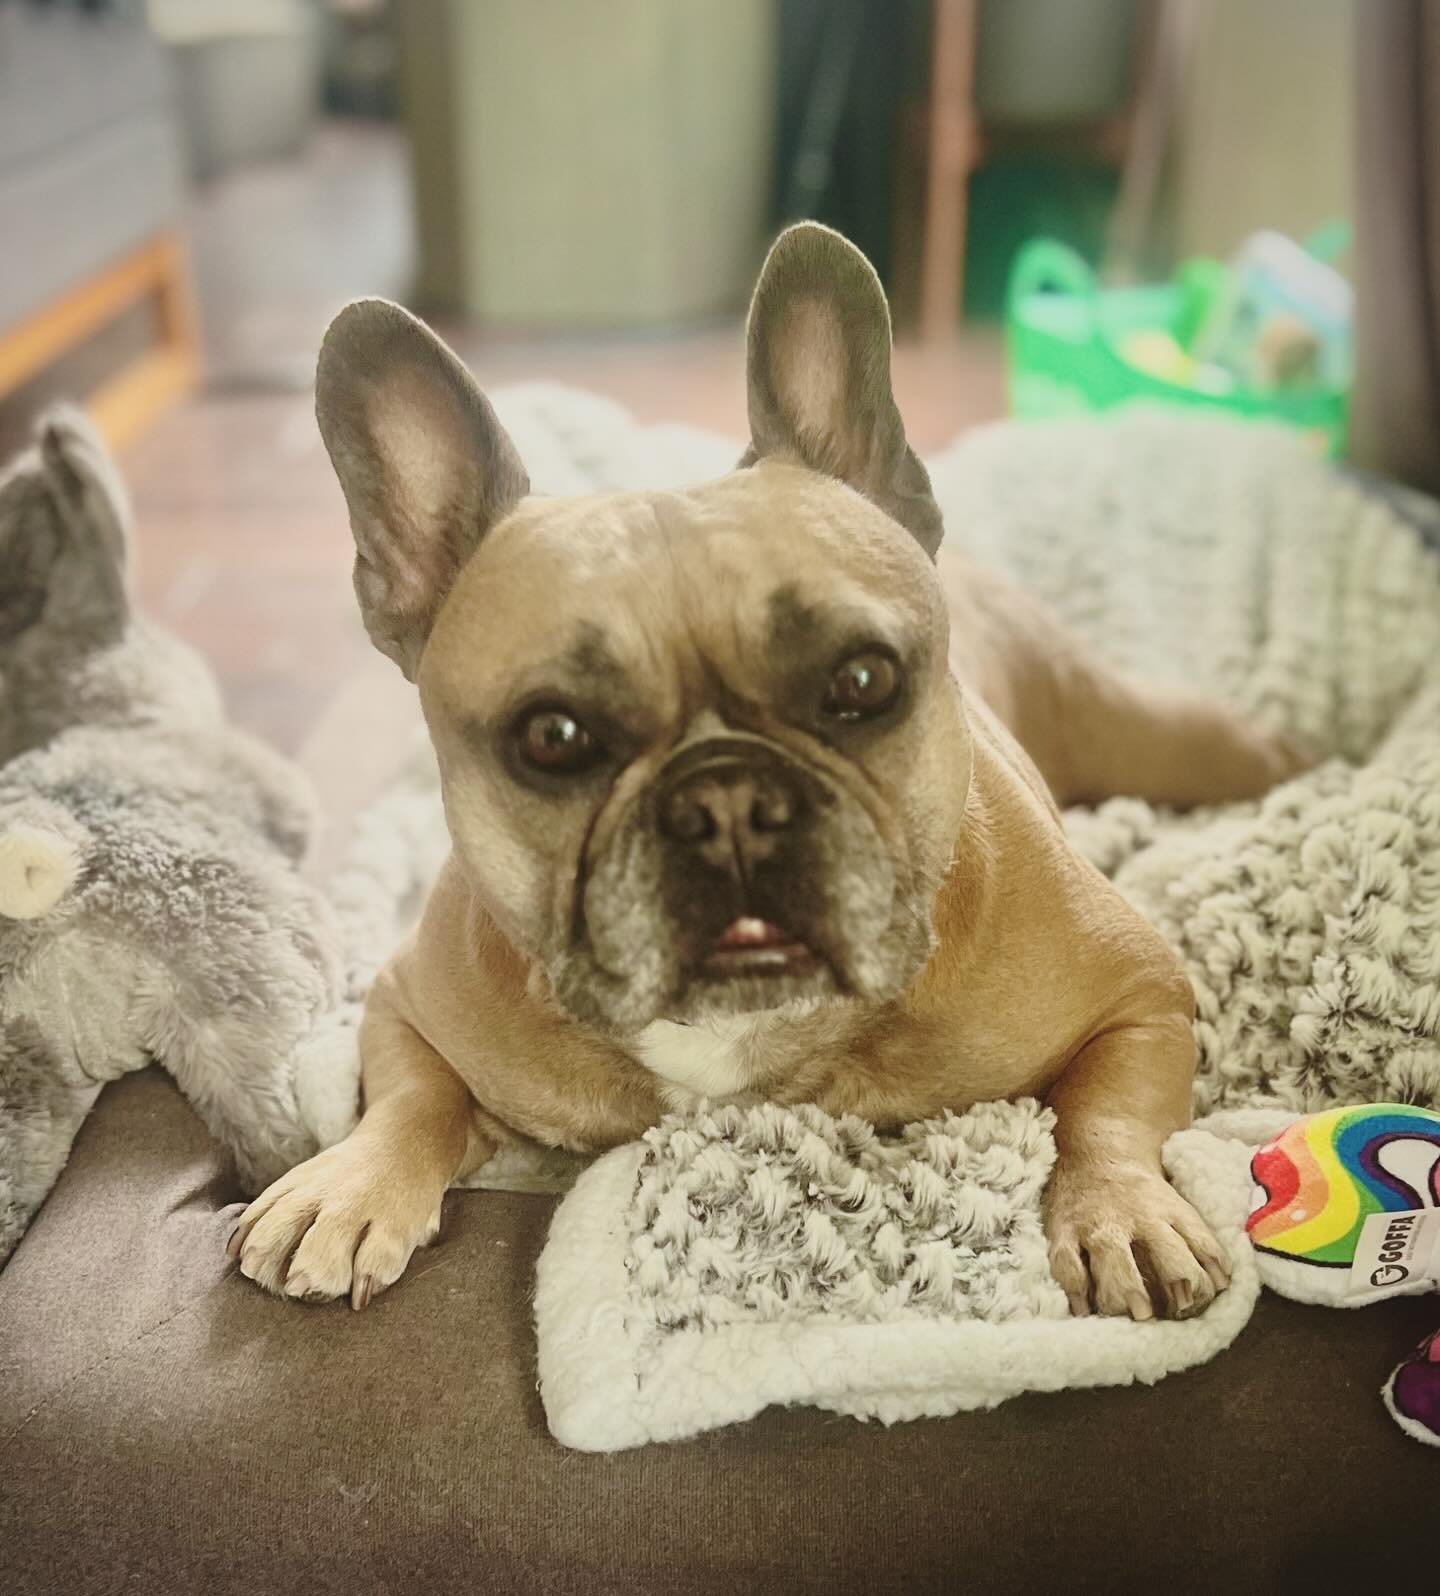 The many faces of @mrsfitz_frenchie_silverlake 🐶

Is is normal to just want to hang out with your dog all day? ❤️

My heart is full just looking at her. 😍

#msfitz #frenchbulldog #lovemydog #doglover #homesweethome #myheartisfull #loveyourdog